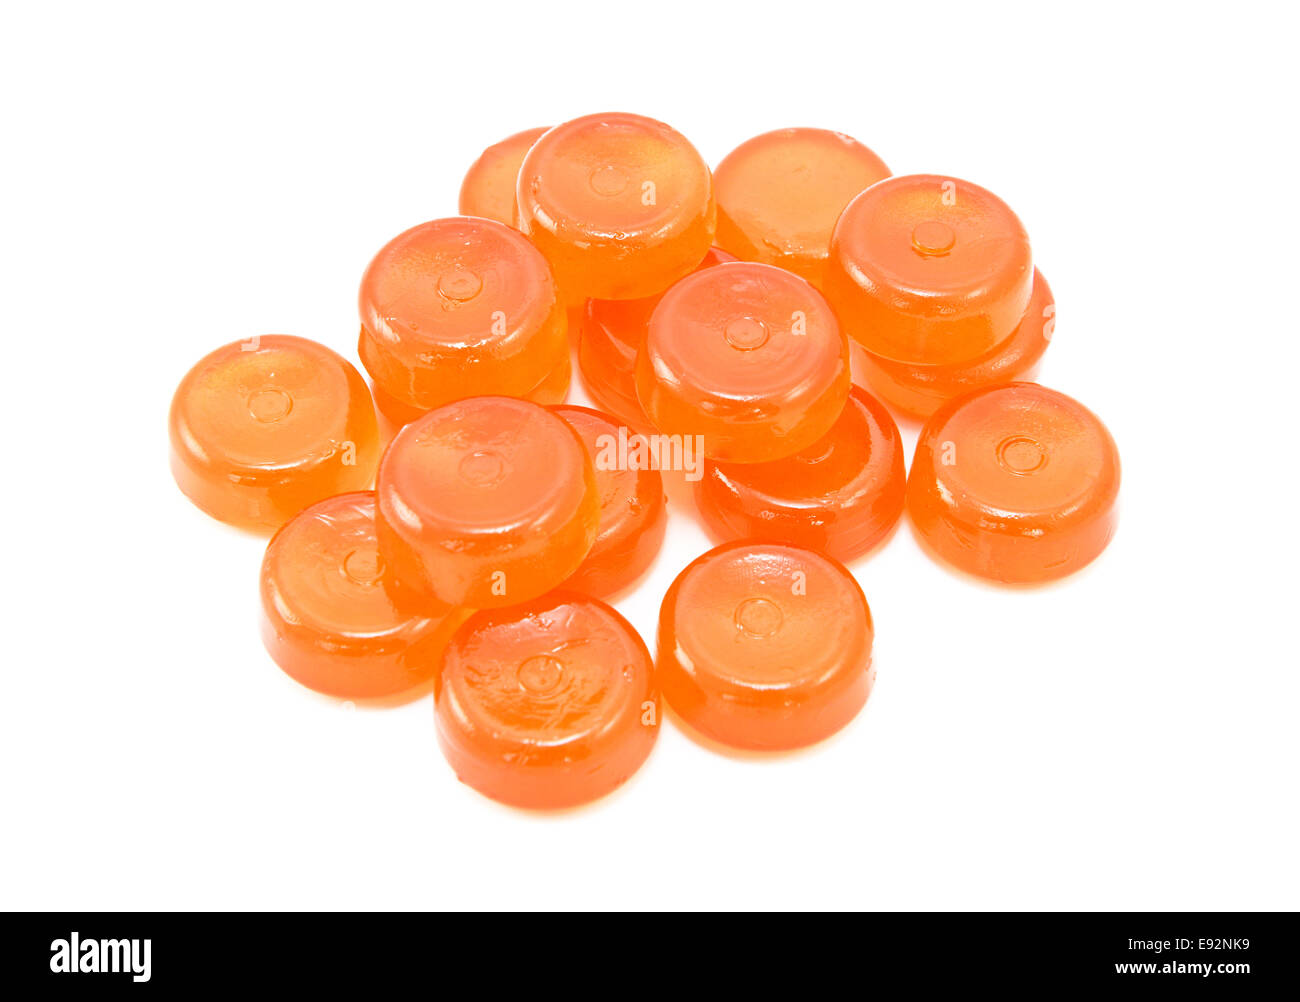 Pile of orange boiled sweets, or hard candies, isolated on a white background Stock Photo